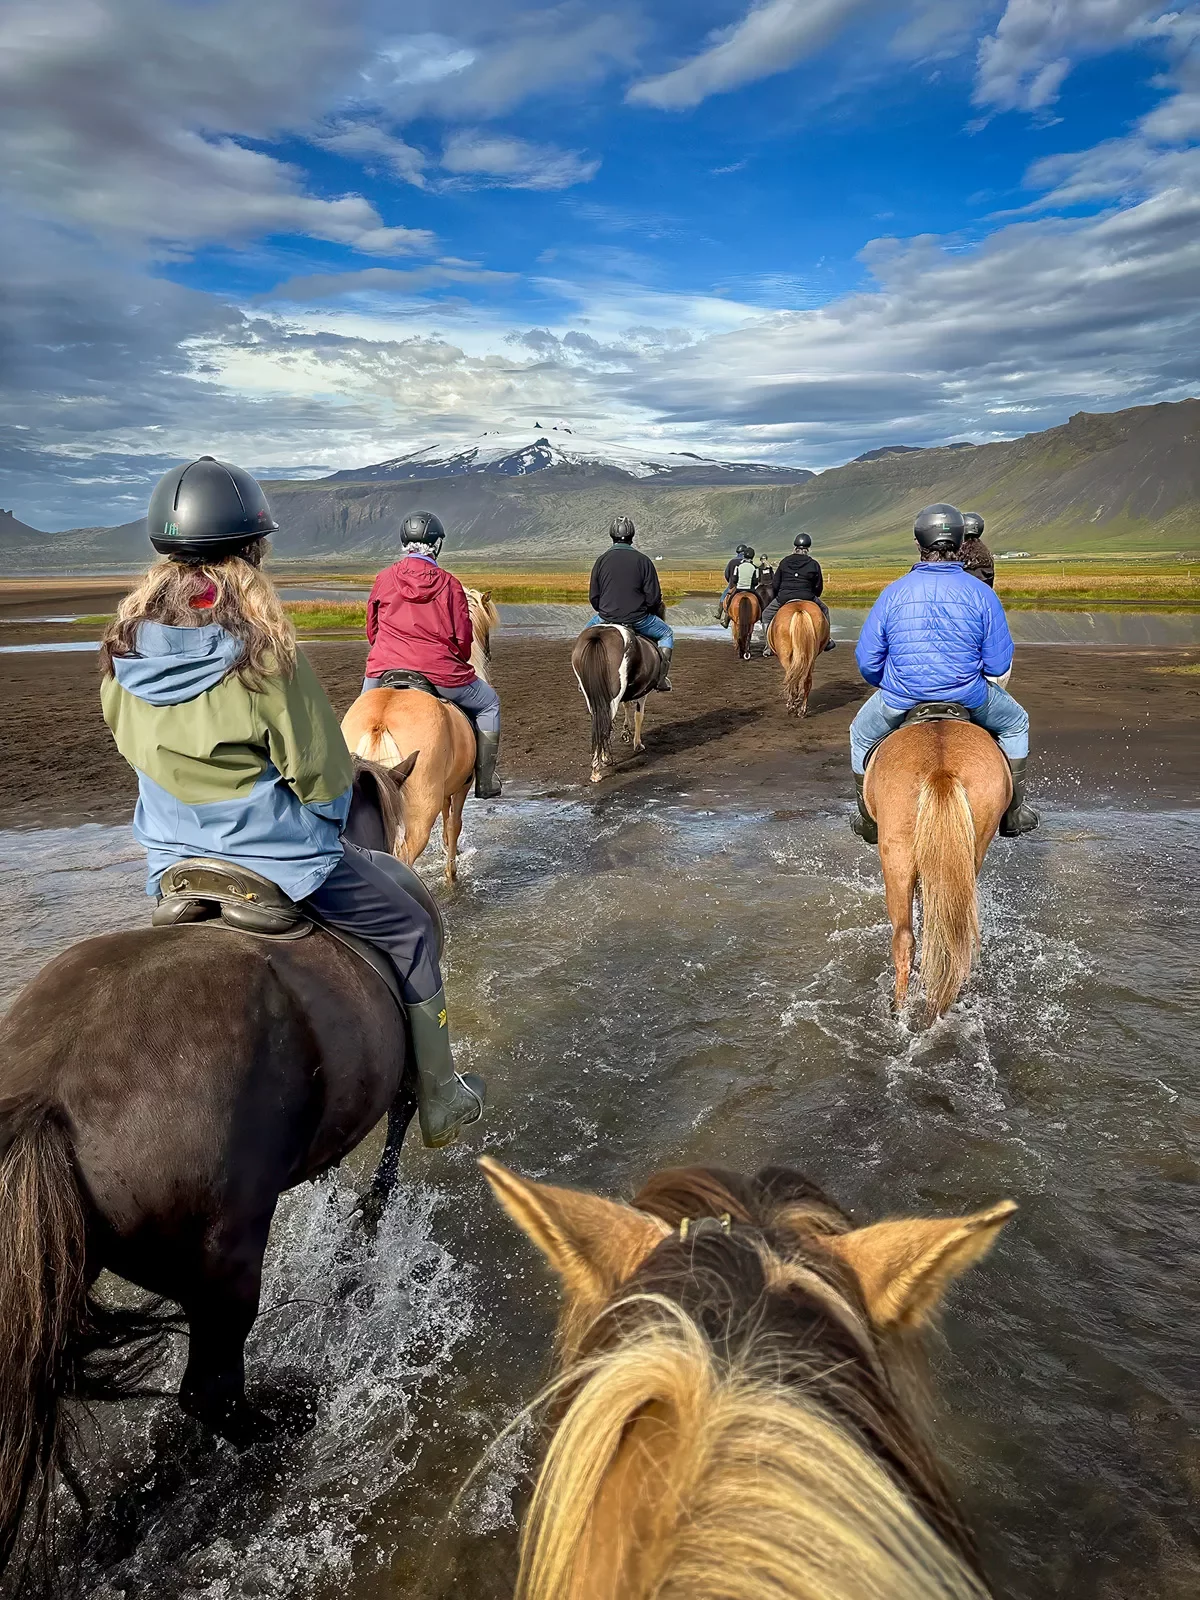 People riding horses in a shallow river